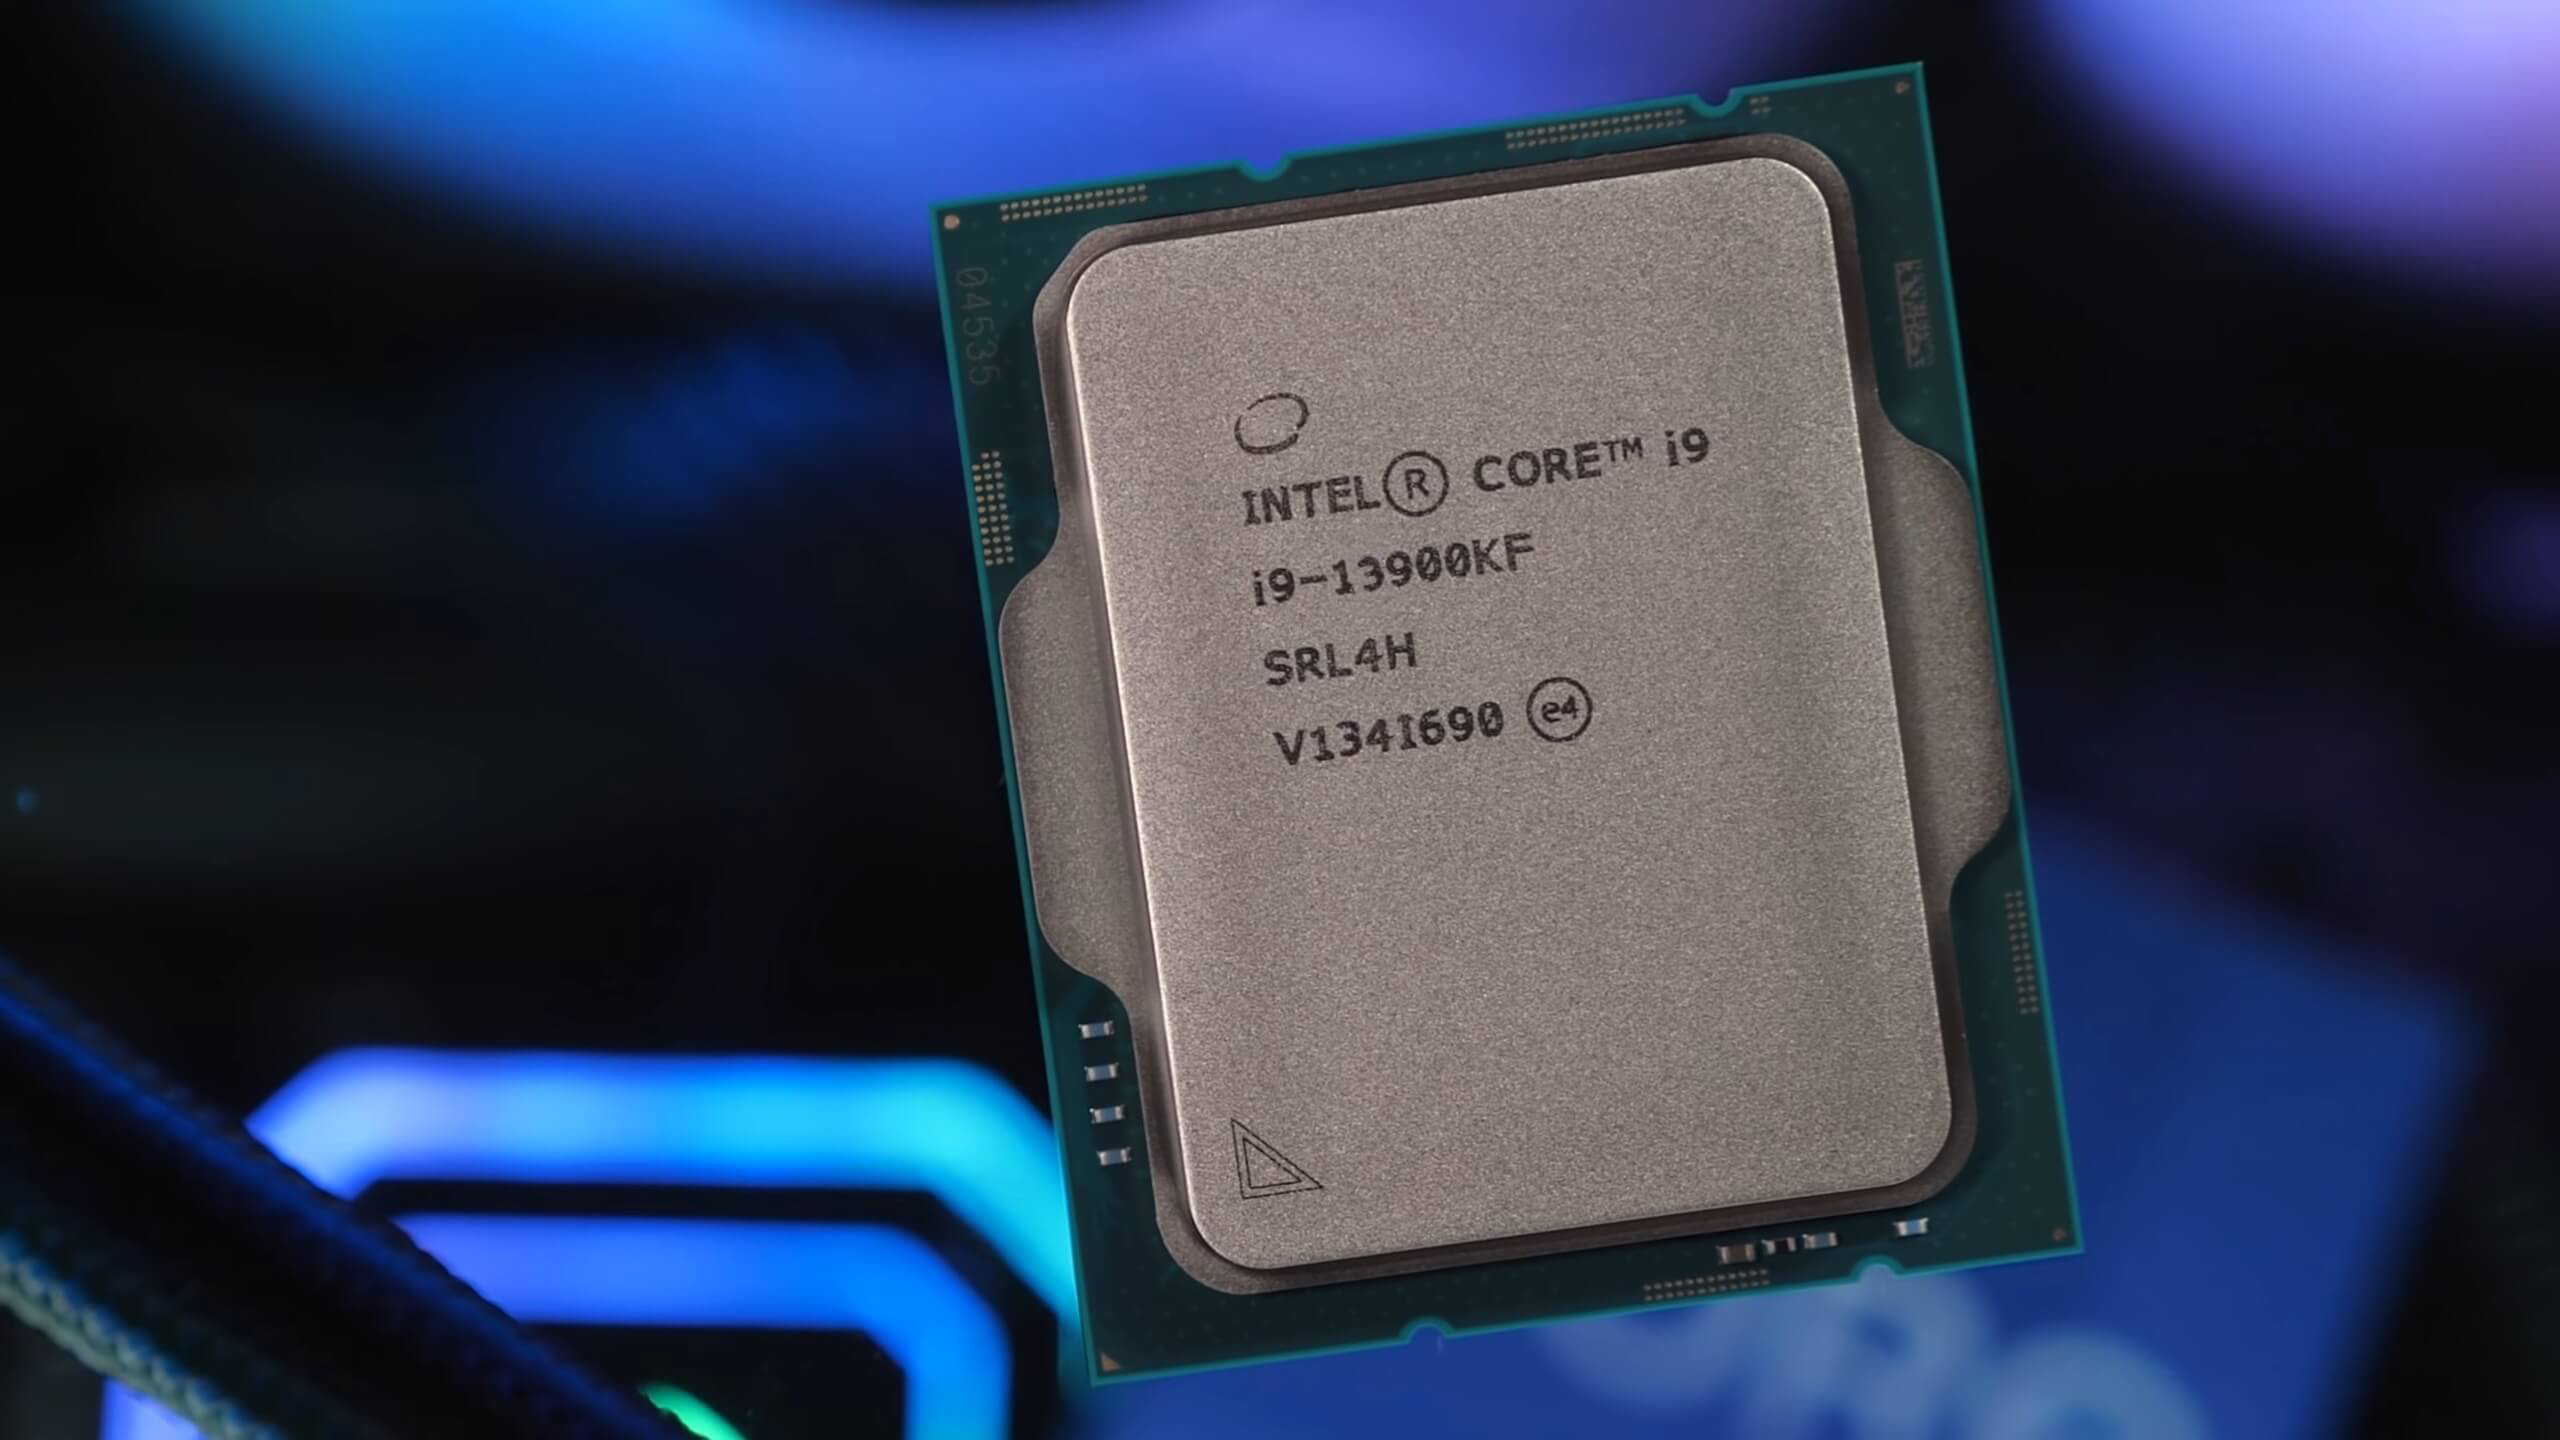 Intel i9-13900KF Can Go as High as 6.0GHz Even on A Budget B660 Motherboard